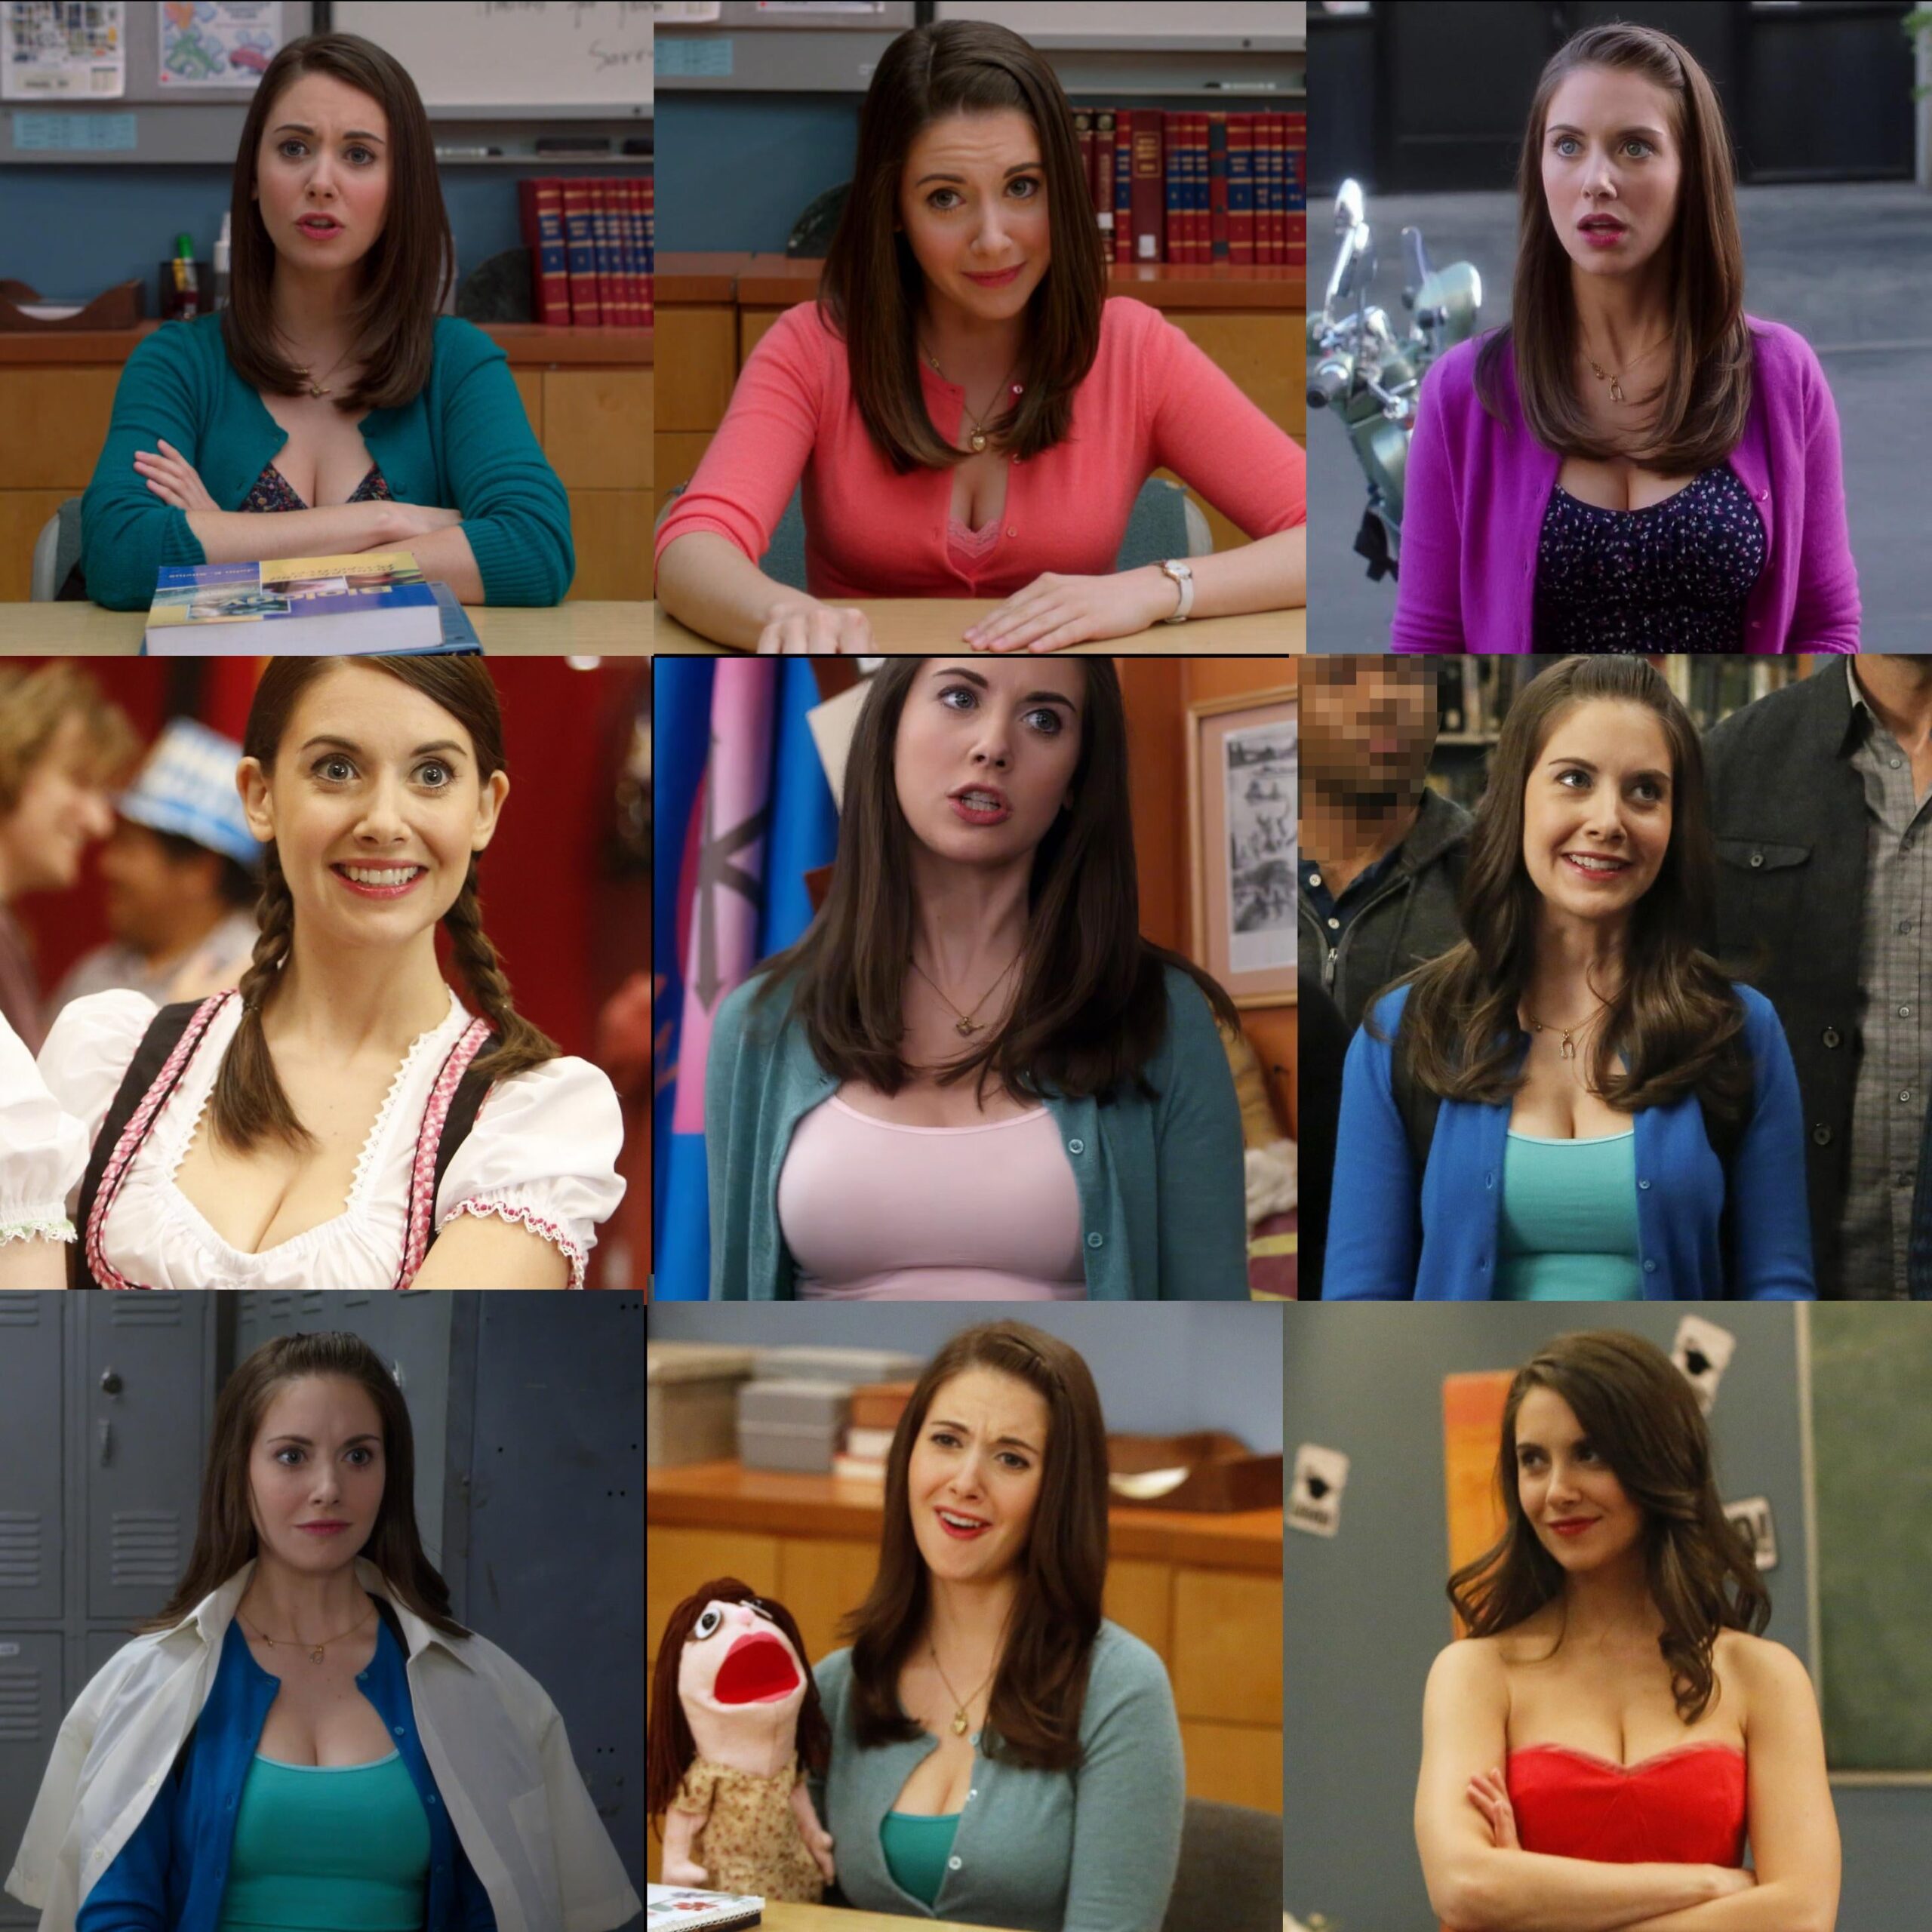 Alison Brie as Annie Edison would have been the greatest